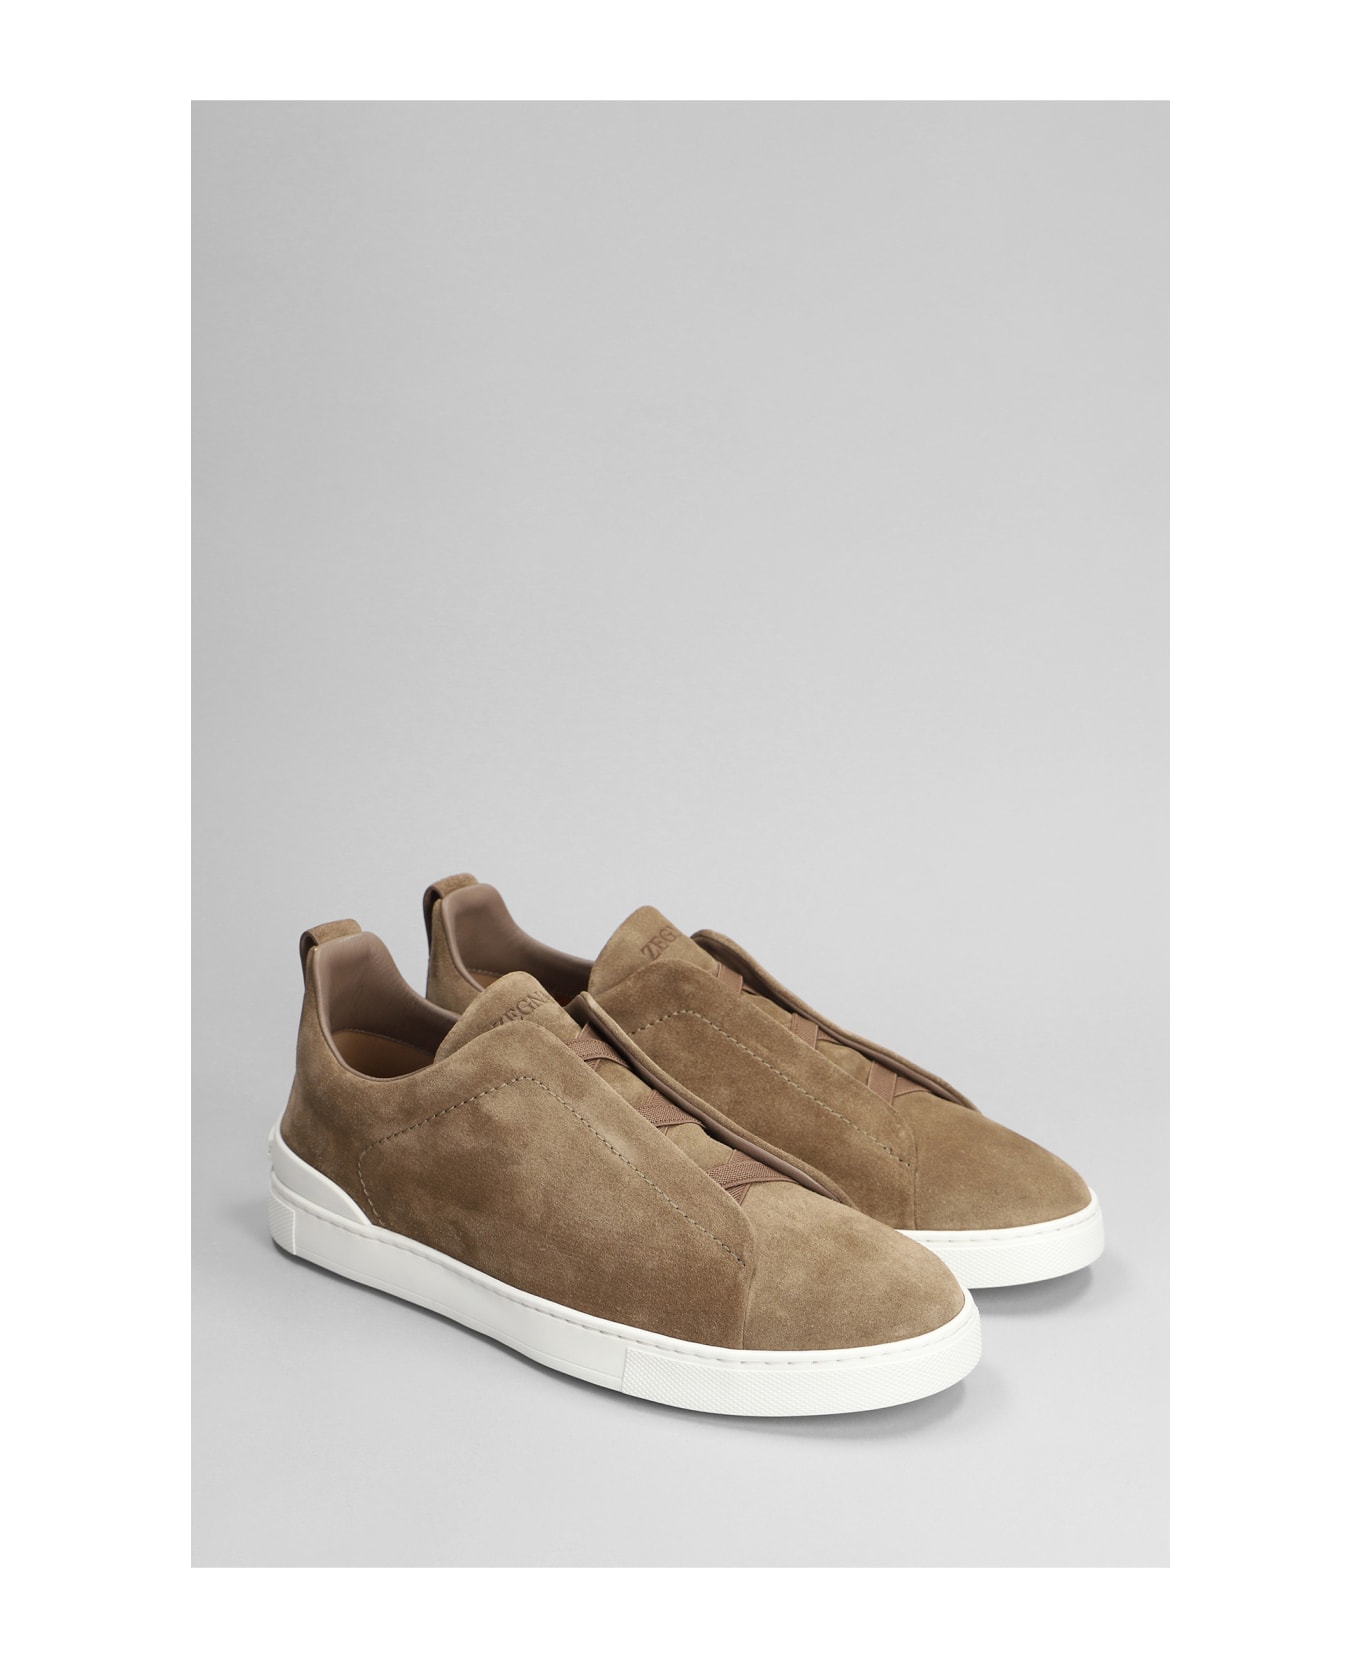 Zegna Triple Stich Sneakers In Camel Suede - Camel